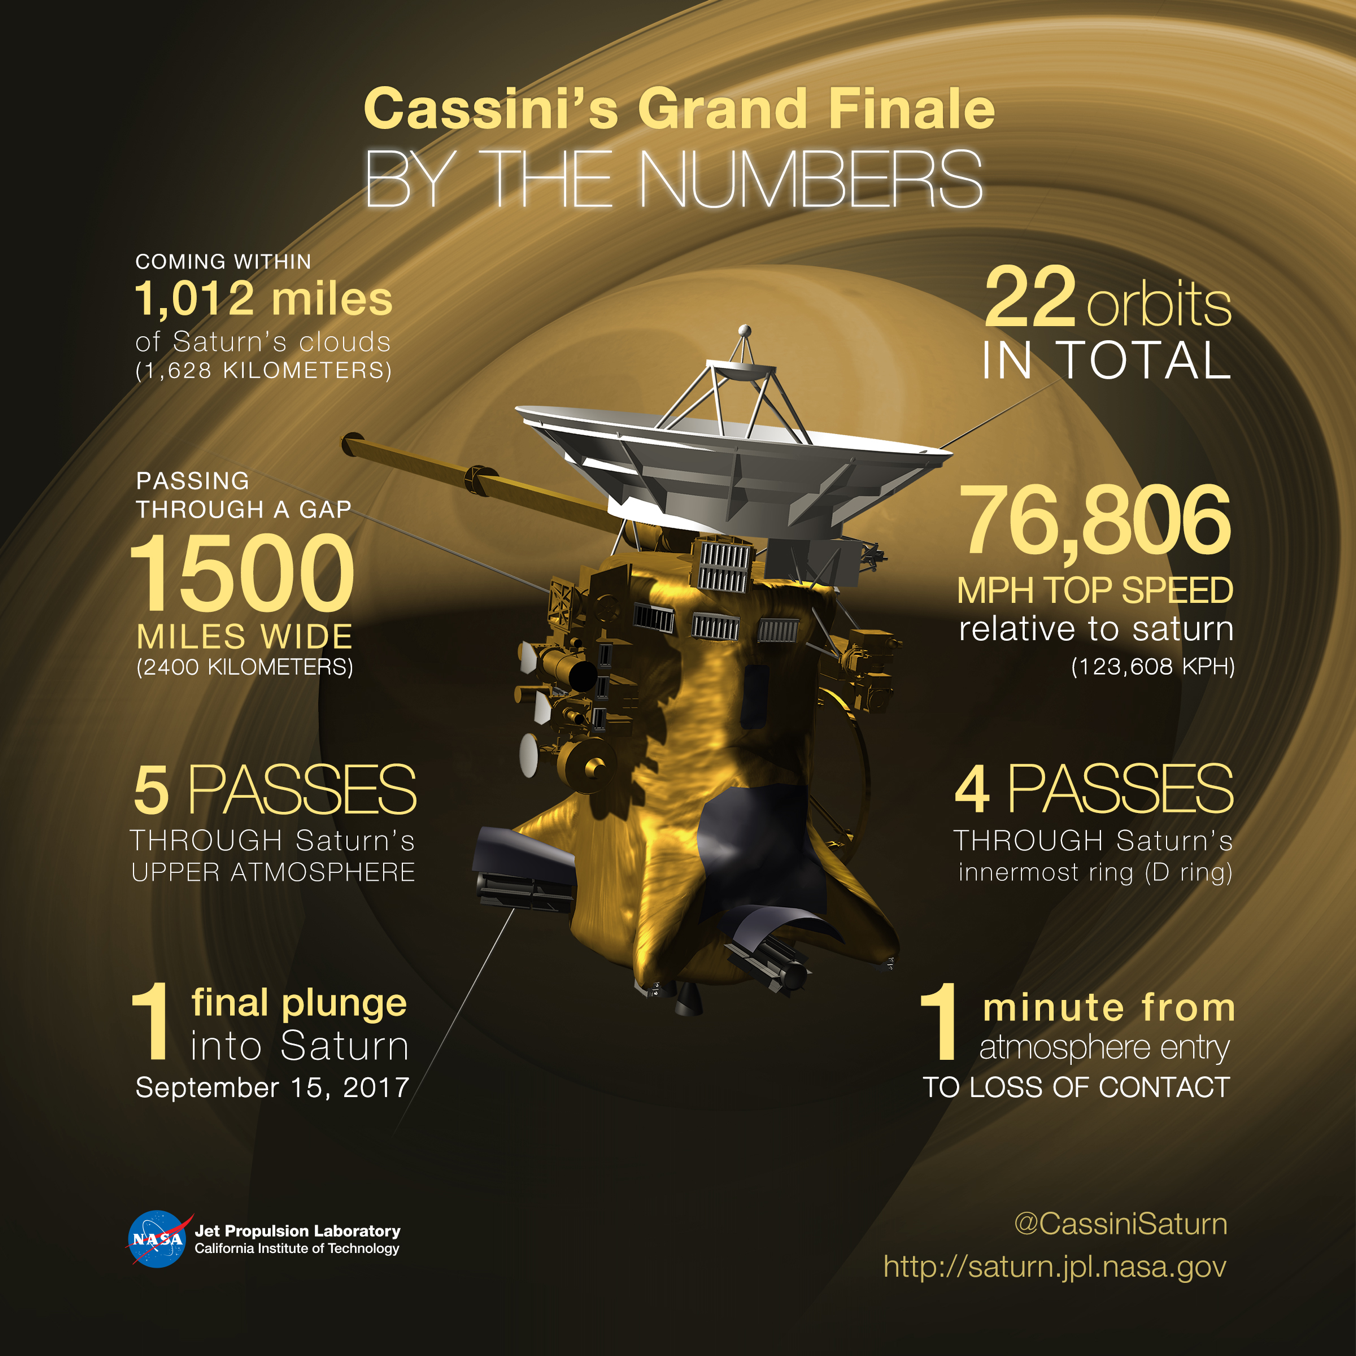 Illustrated graphic breaking down Cassini's Grand Finale. Full text in caption.